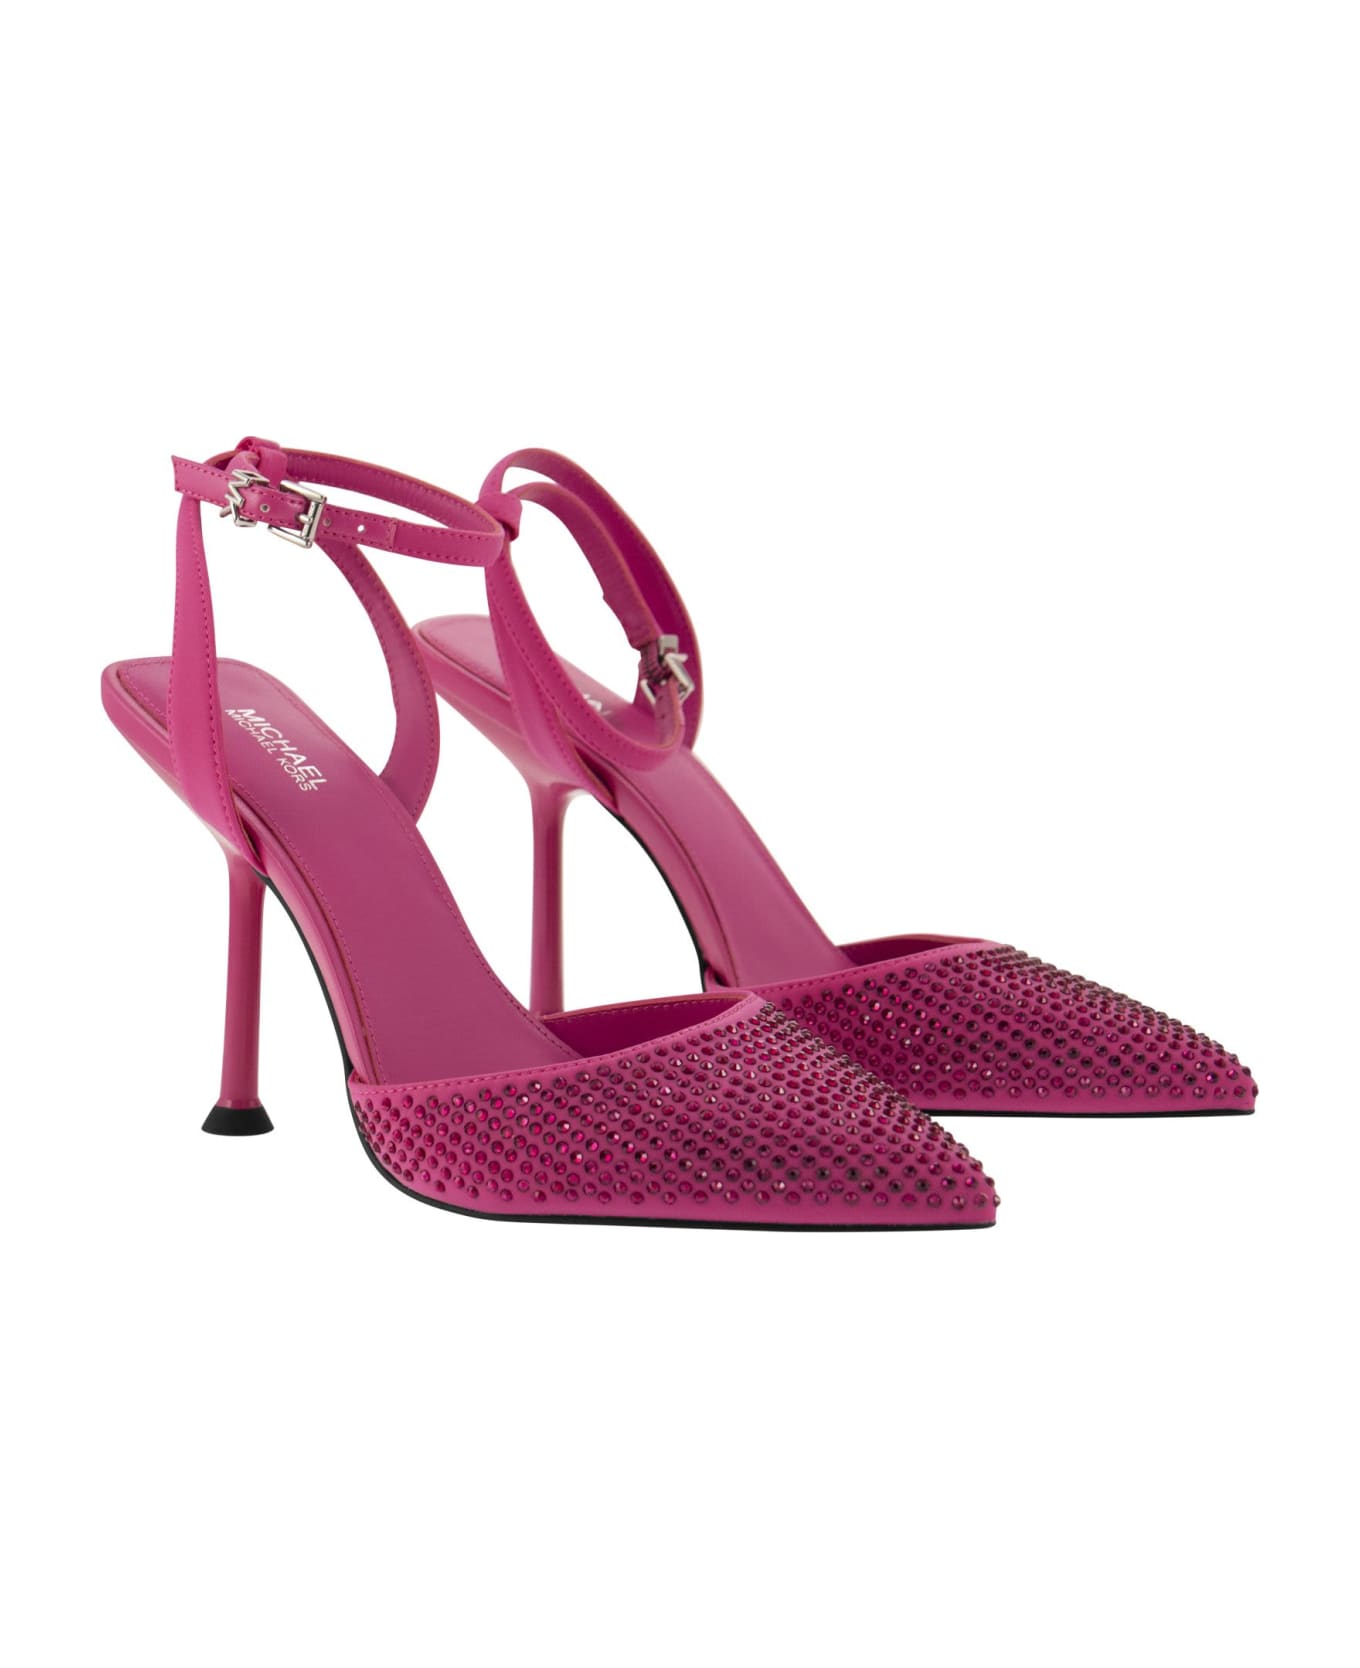 MICHAEL Michael Kors Imani Pump Pumps In Fabric With Crystals - Cerise ハイヒール